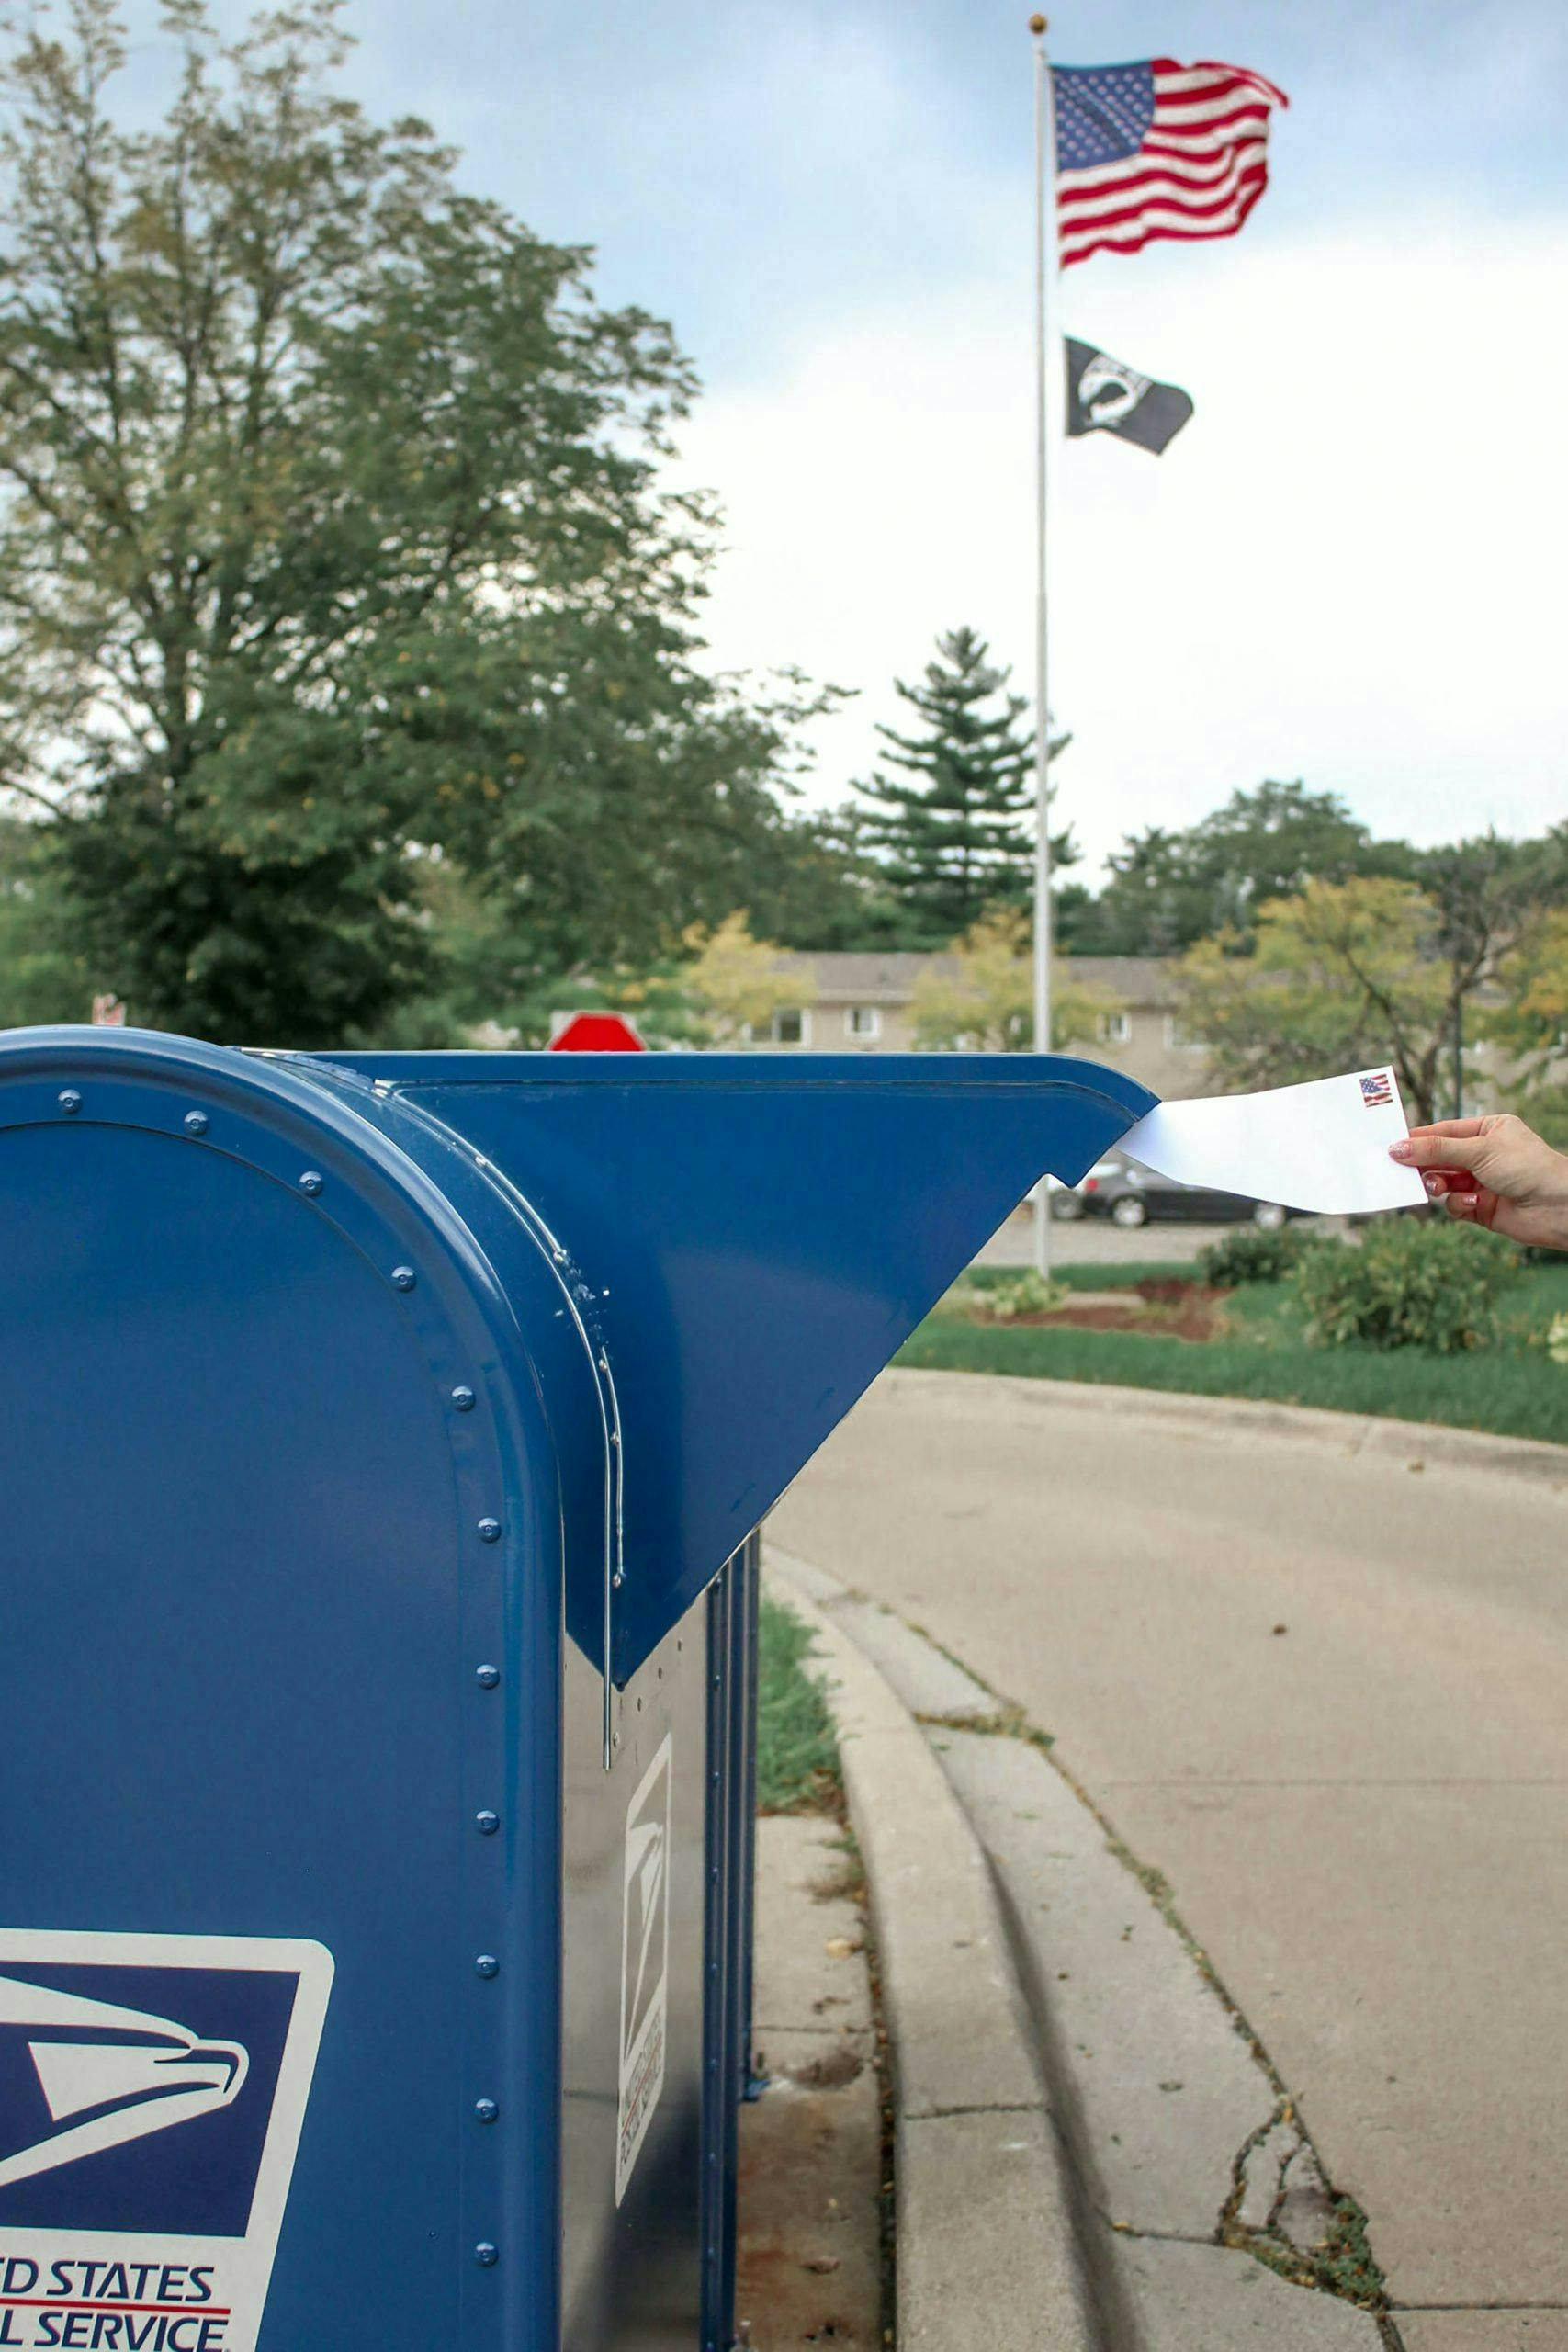 A person is placing a letter into a blue United States Postal Service mailbox on a suburban street, with trees and a U.S. flag visible in the background.